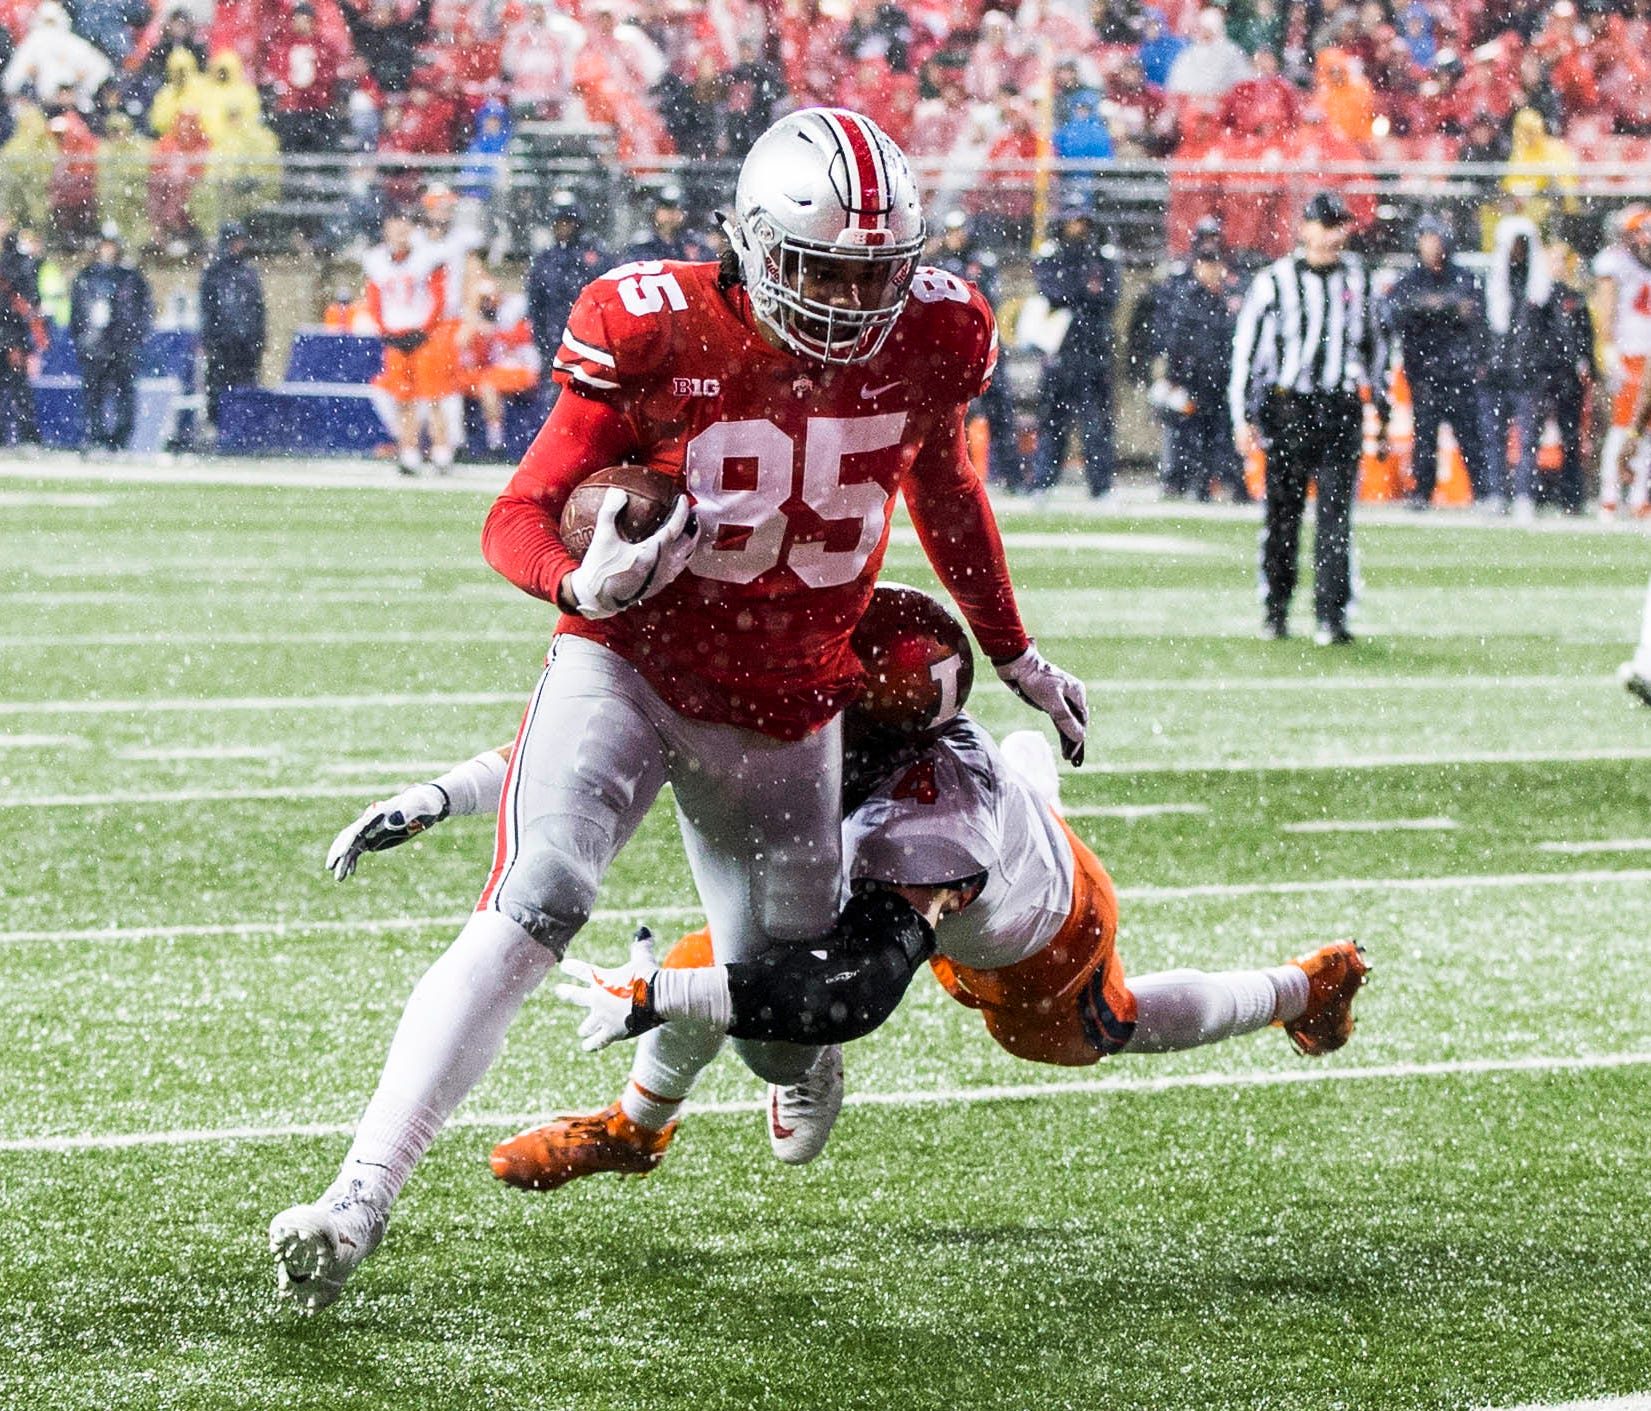 Ohio State tight end Marcus Baugh evades an Illinois defender to score  a touchdown at Ohio Stadium.